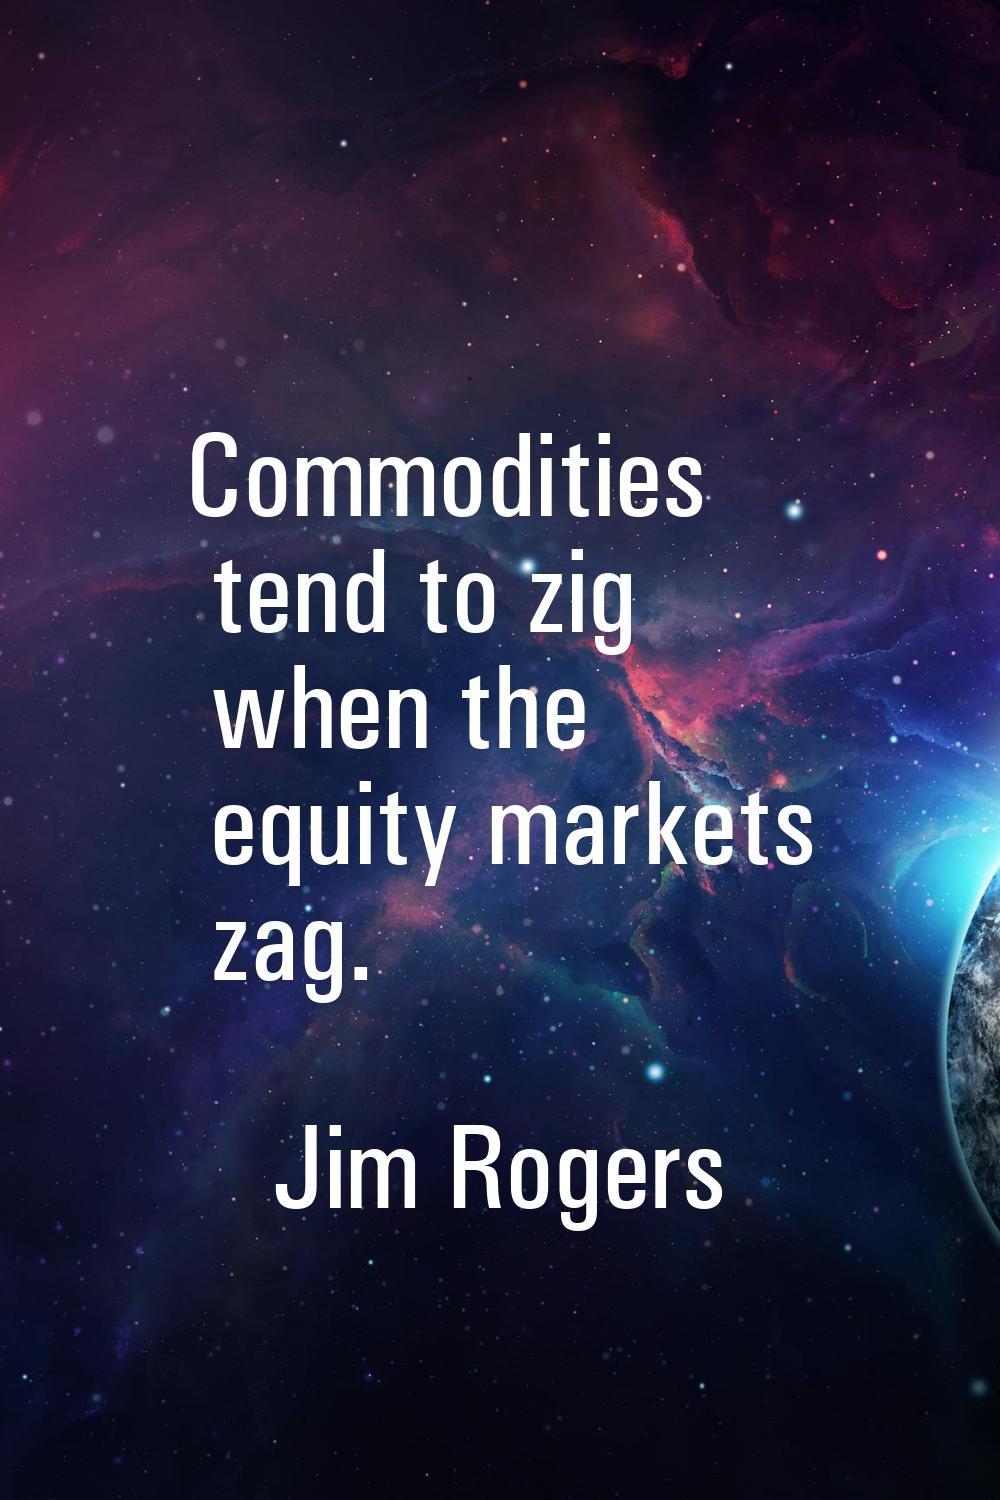 Commodities tend to zig when the equity markets zag.